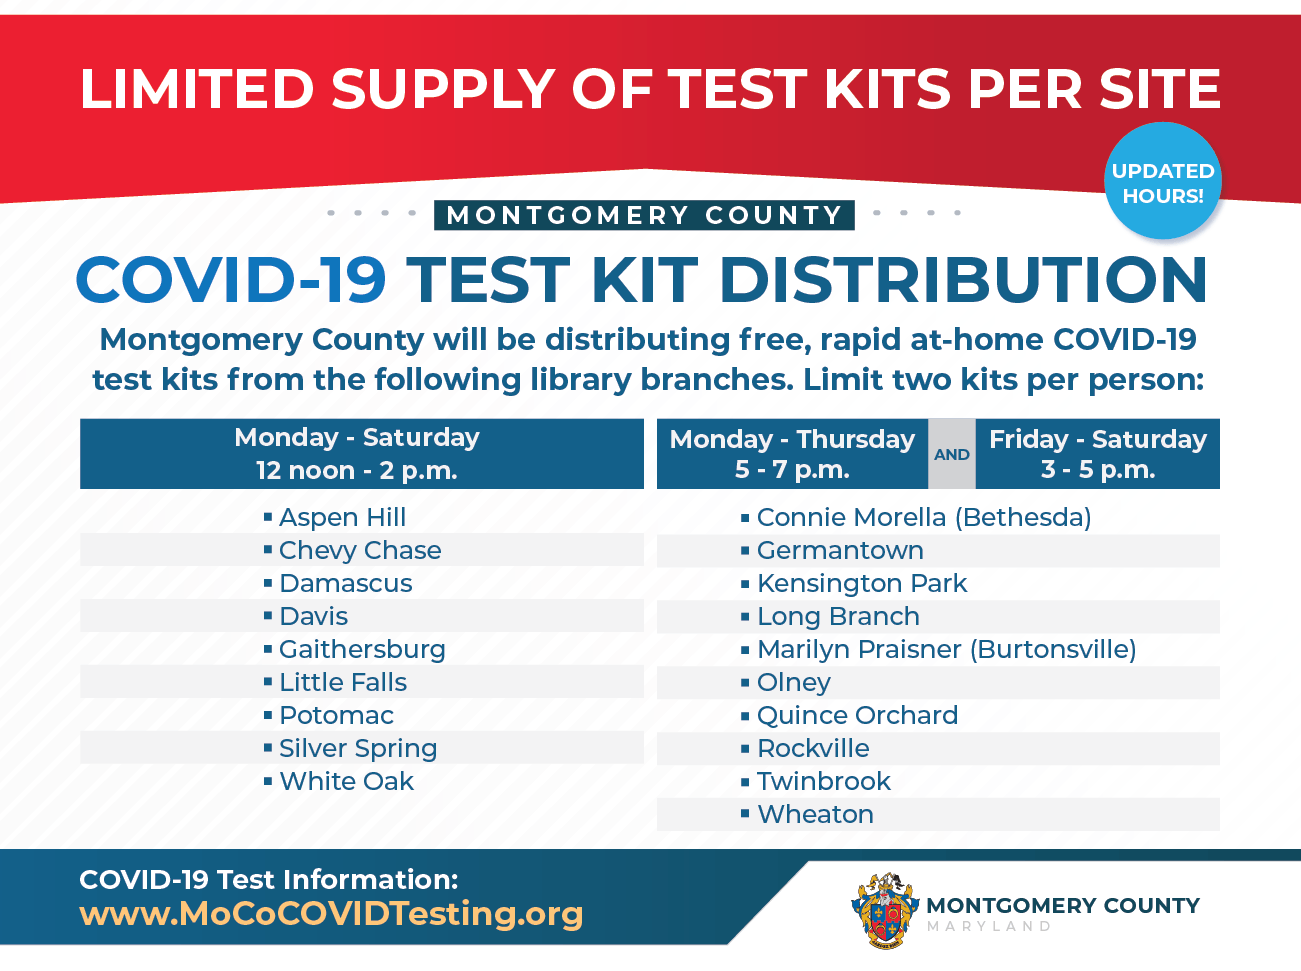 Limited Supply of COVID-19 Test Kits Available at Libraries